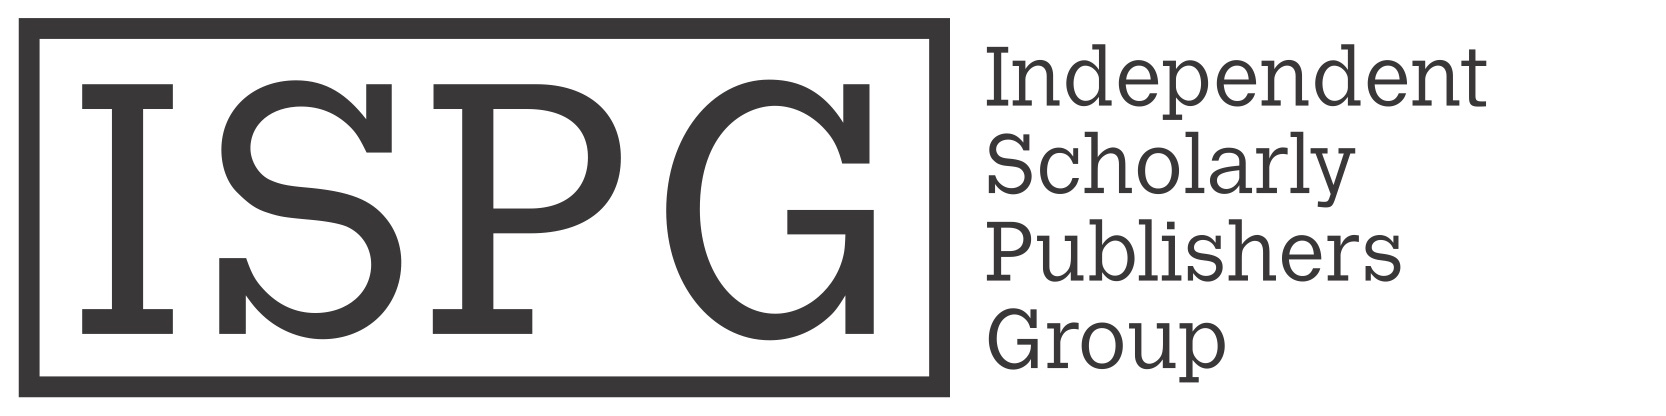 Independent Scholarly Publishers Group Offers Health Sciences and Life Sciences Journals